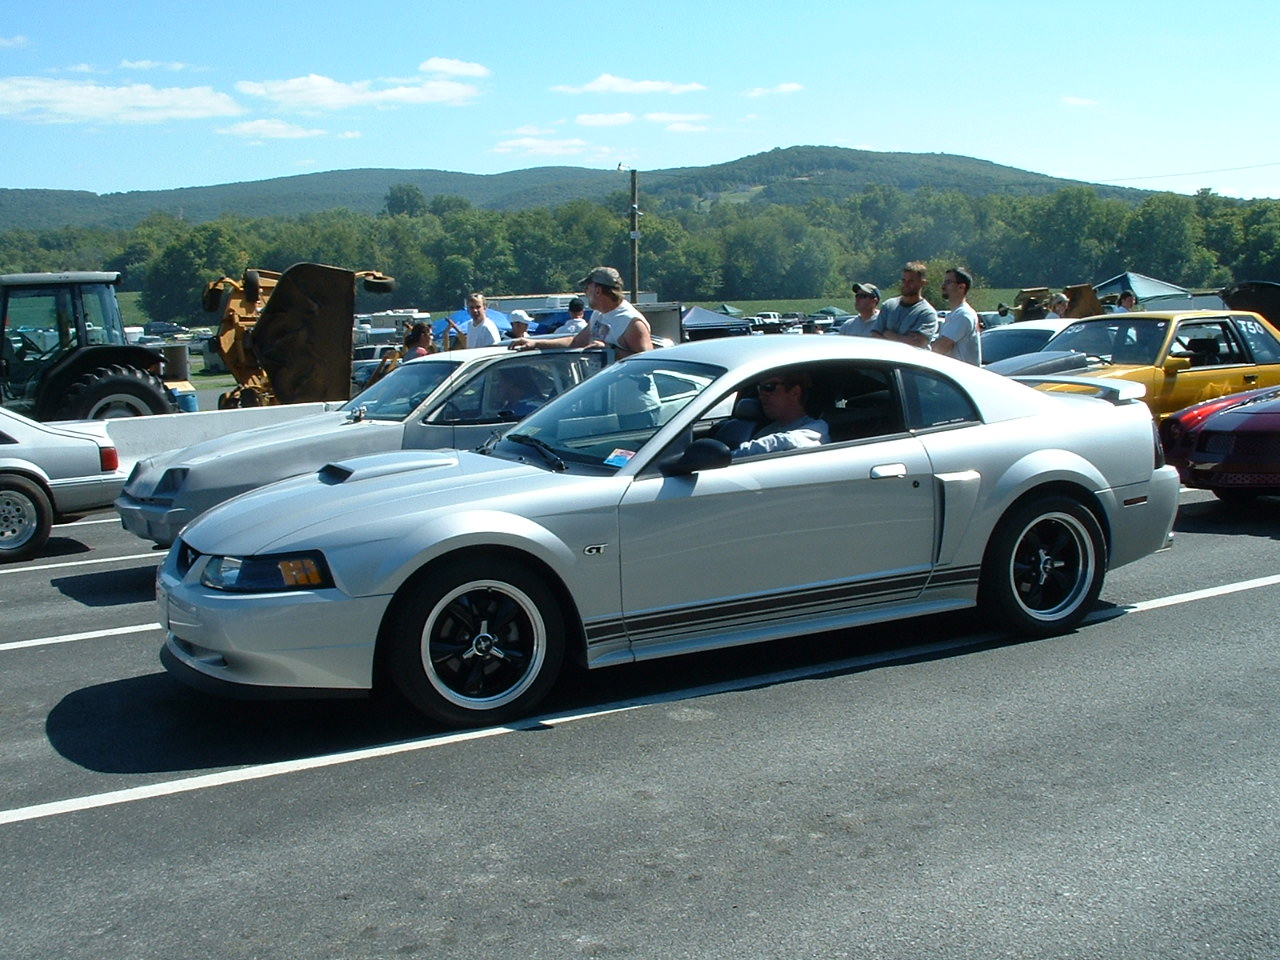 2001 Ford mustang gt 0-60 time #2